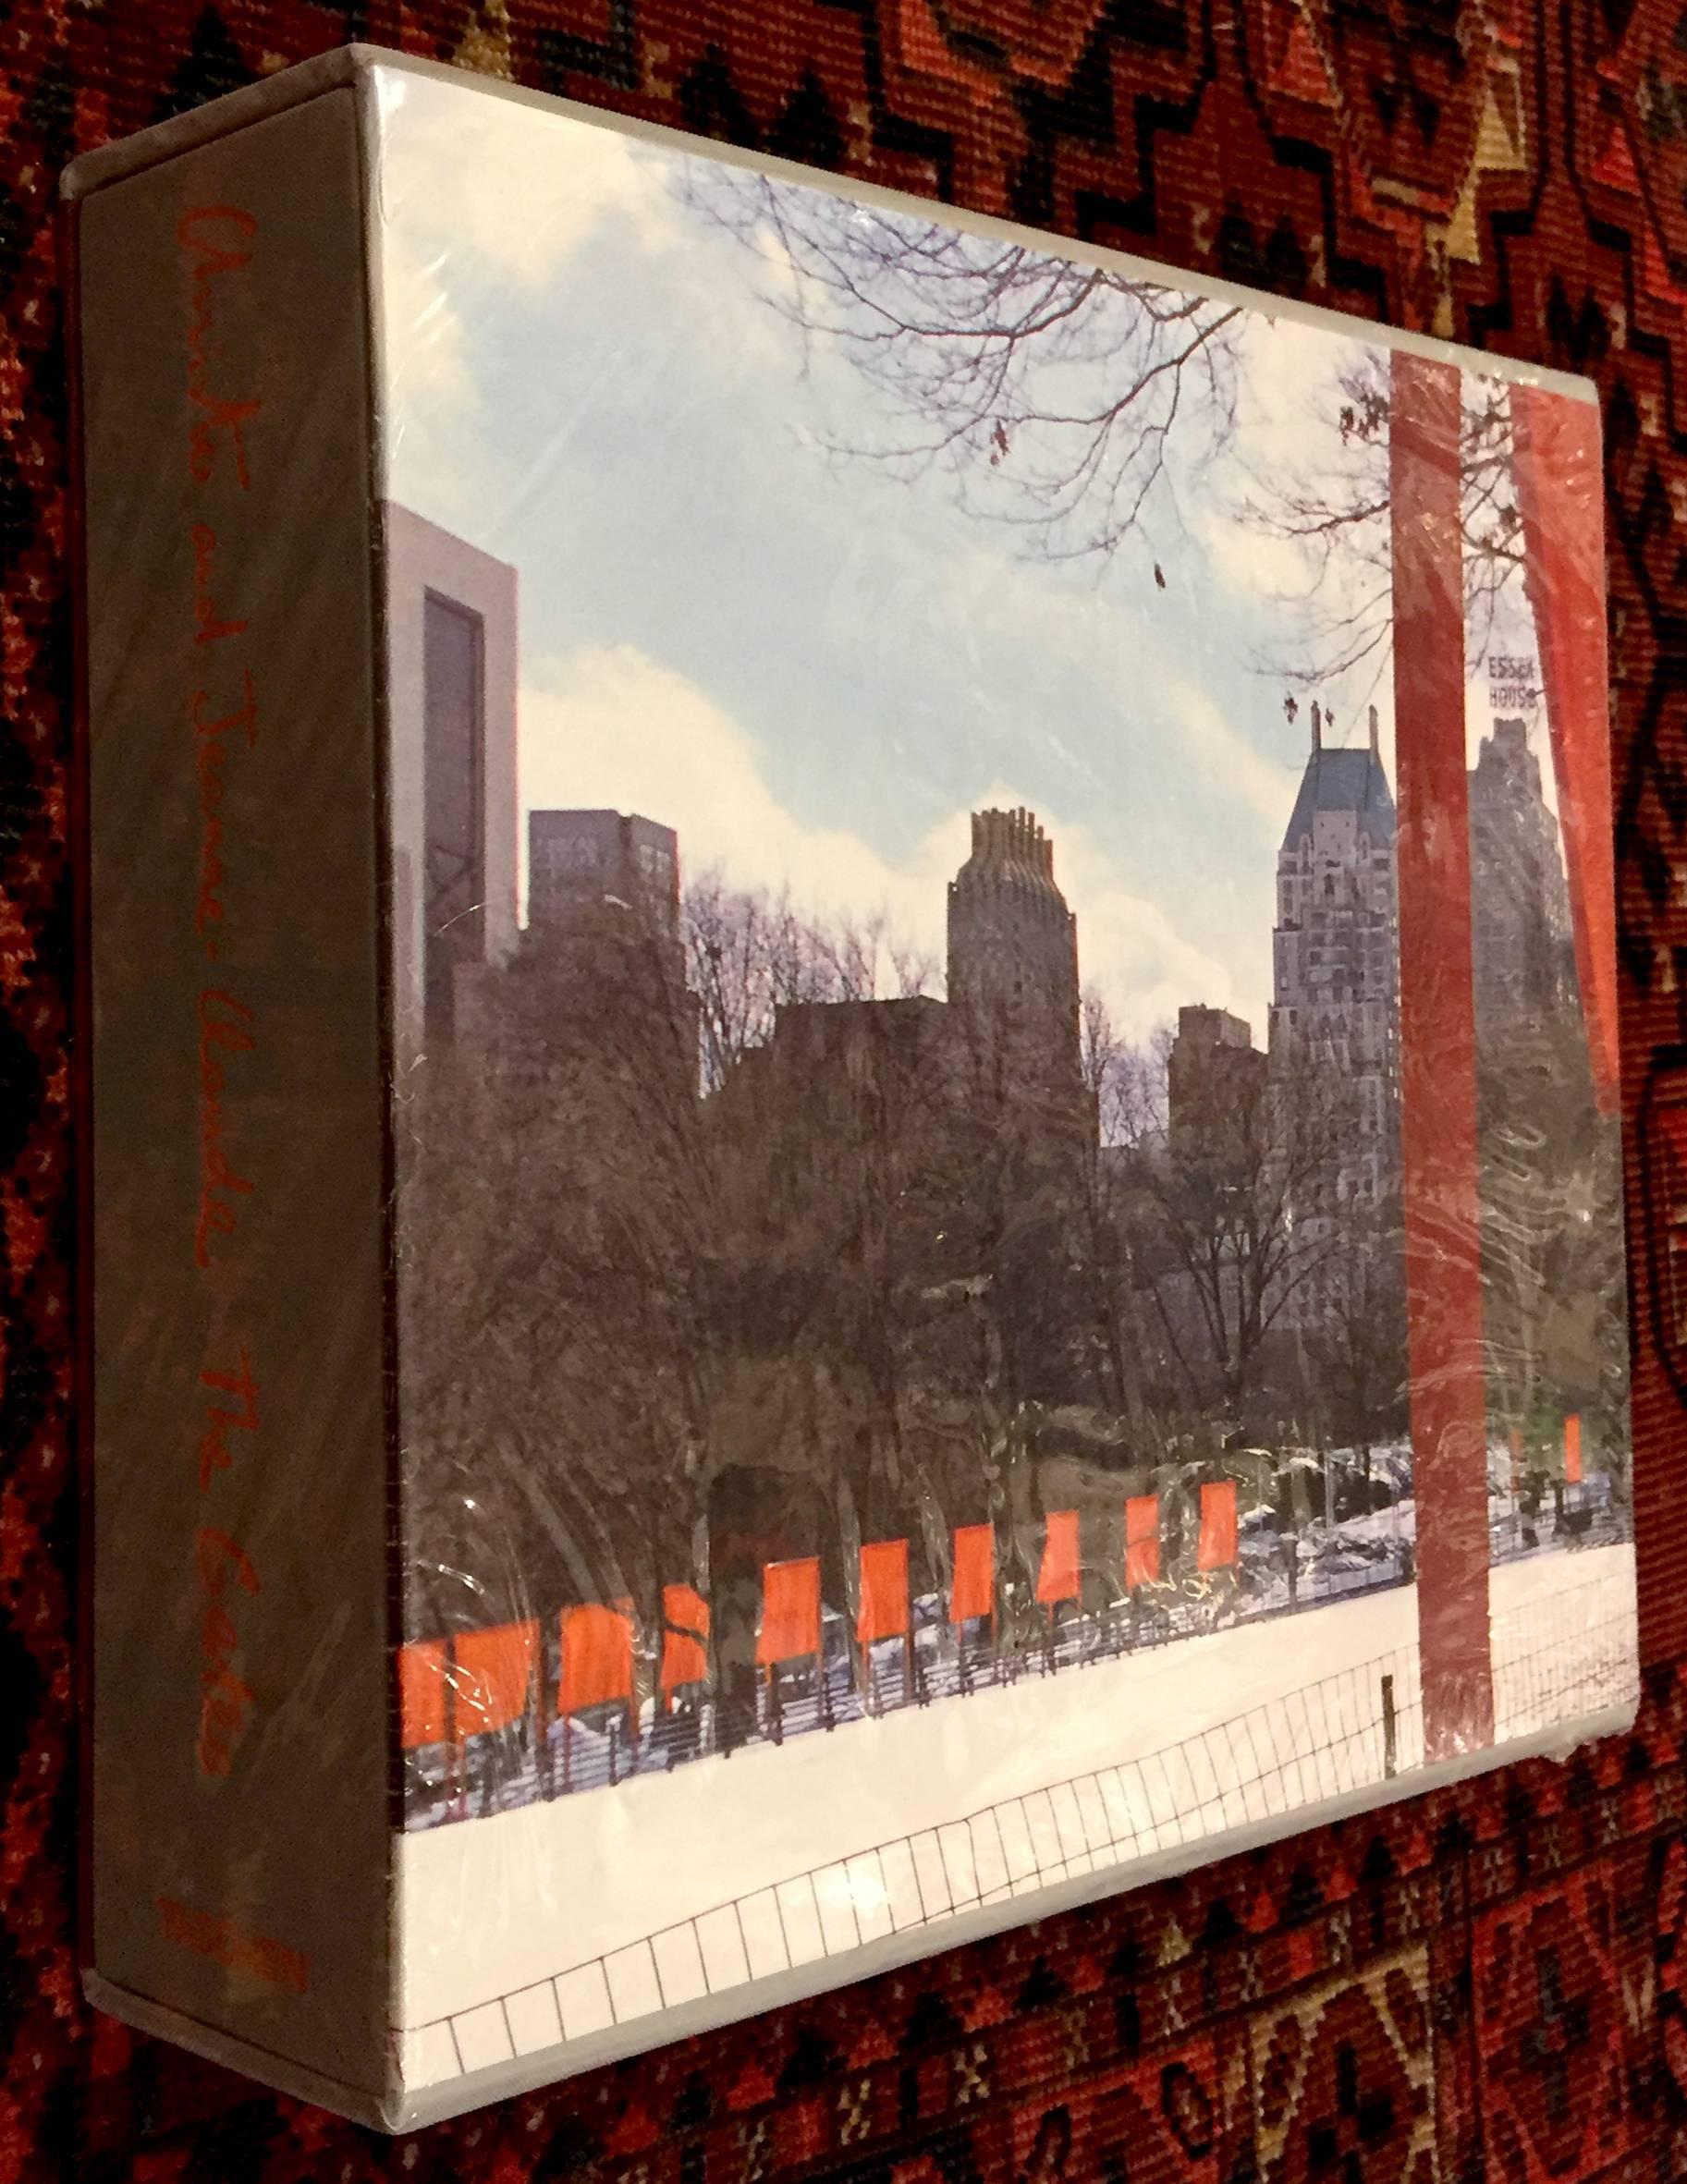 CHRISTO and JEANNE-CLAUDE: The Gates, Central Park, New York City 1979-2005 - Land Art by Christo and Jeanne-Claude